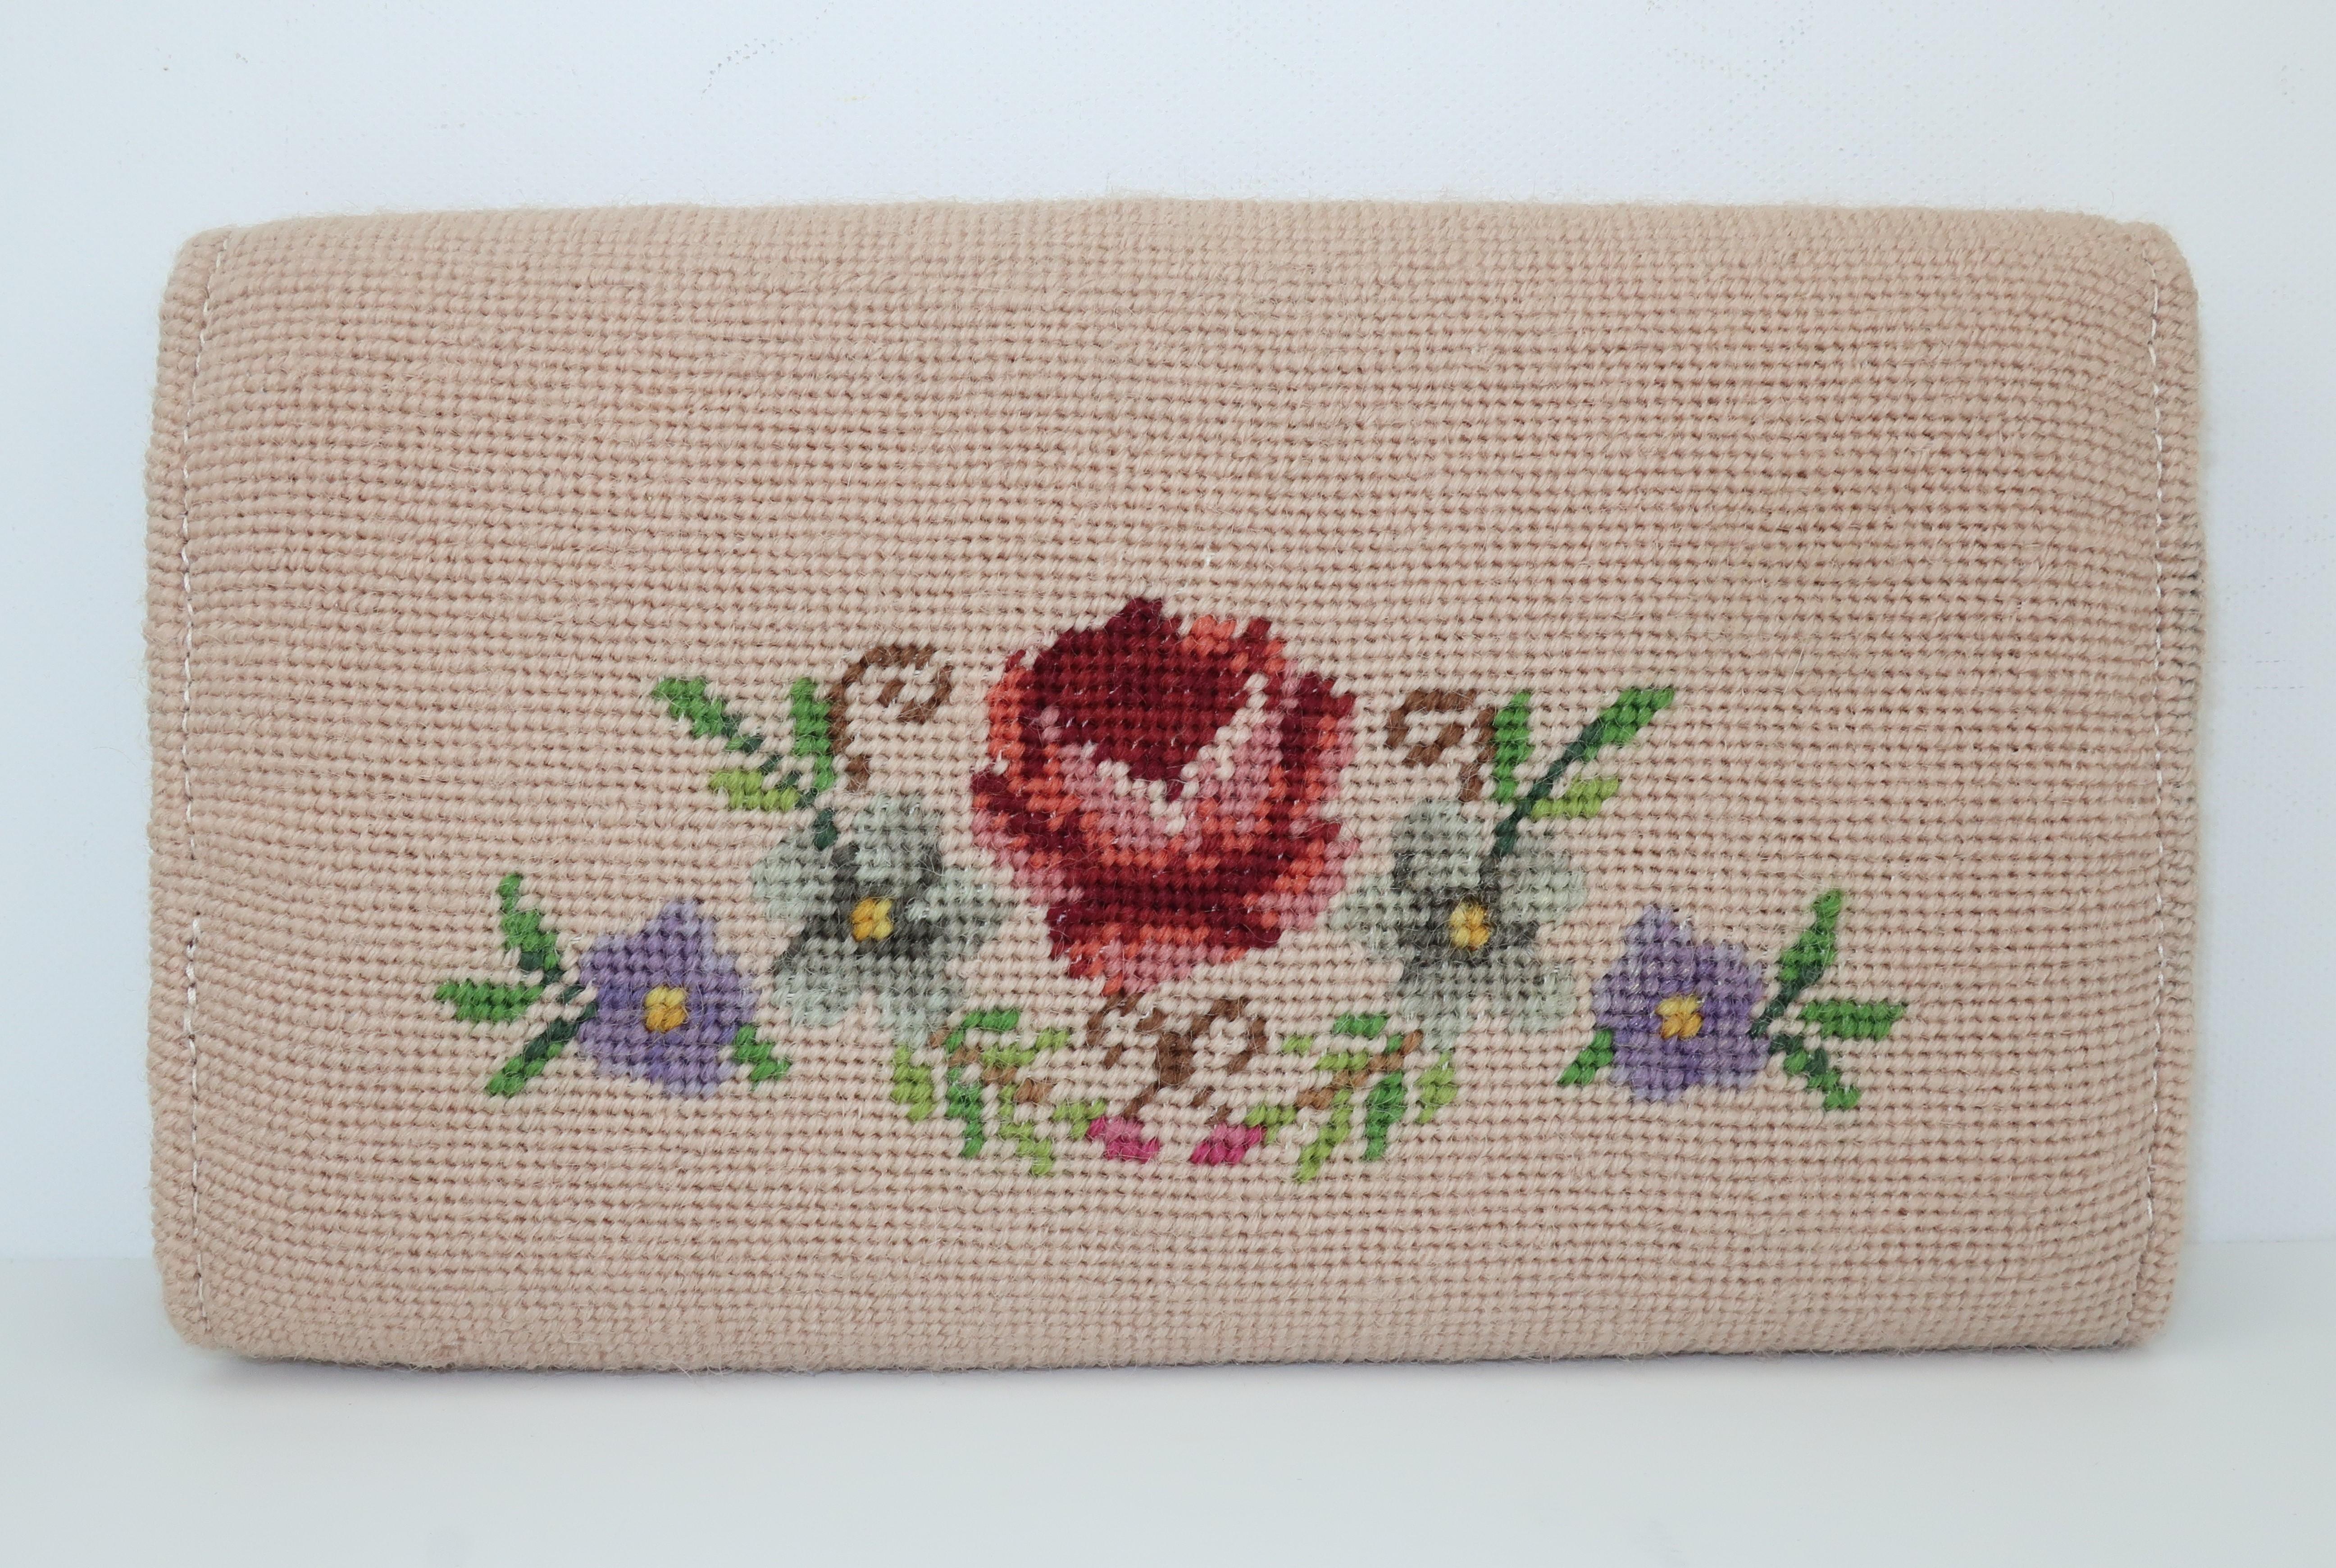 Accessorize an ensemble with this sweet floral needlepoint clutch handbag in shades of putty pink, green, yellow, brown, rose, burgundy, gray and lavender.  The fold over envelope style snaps open to reveal a brown fabric lined interior with an open